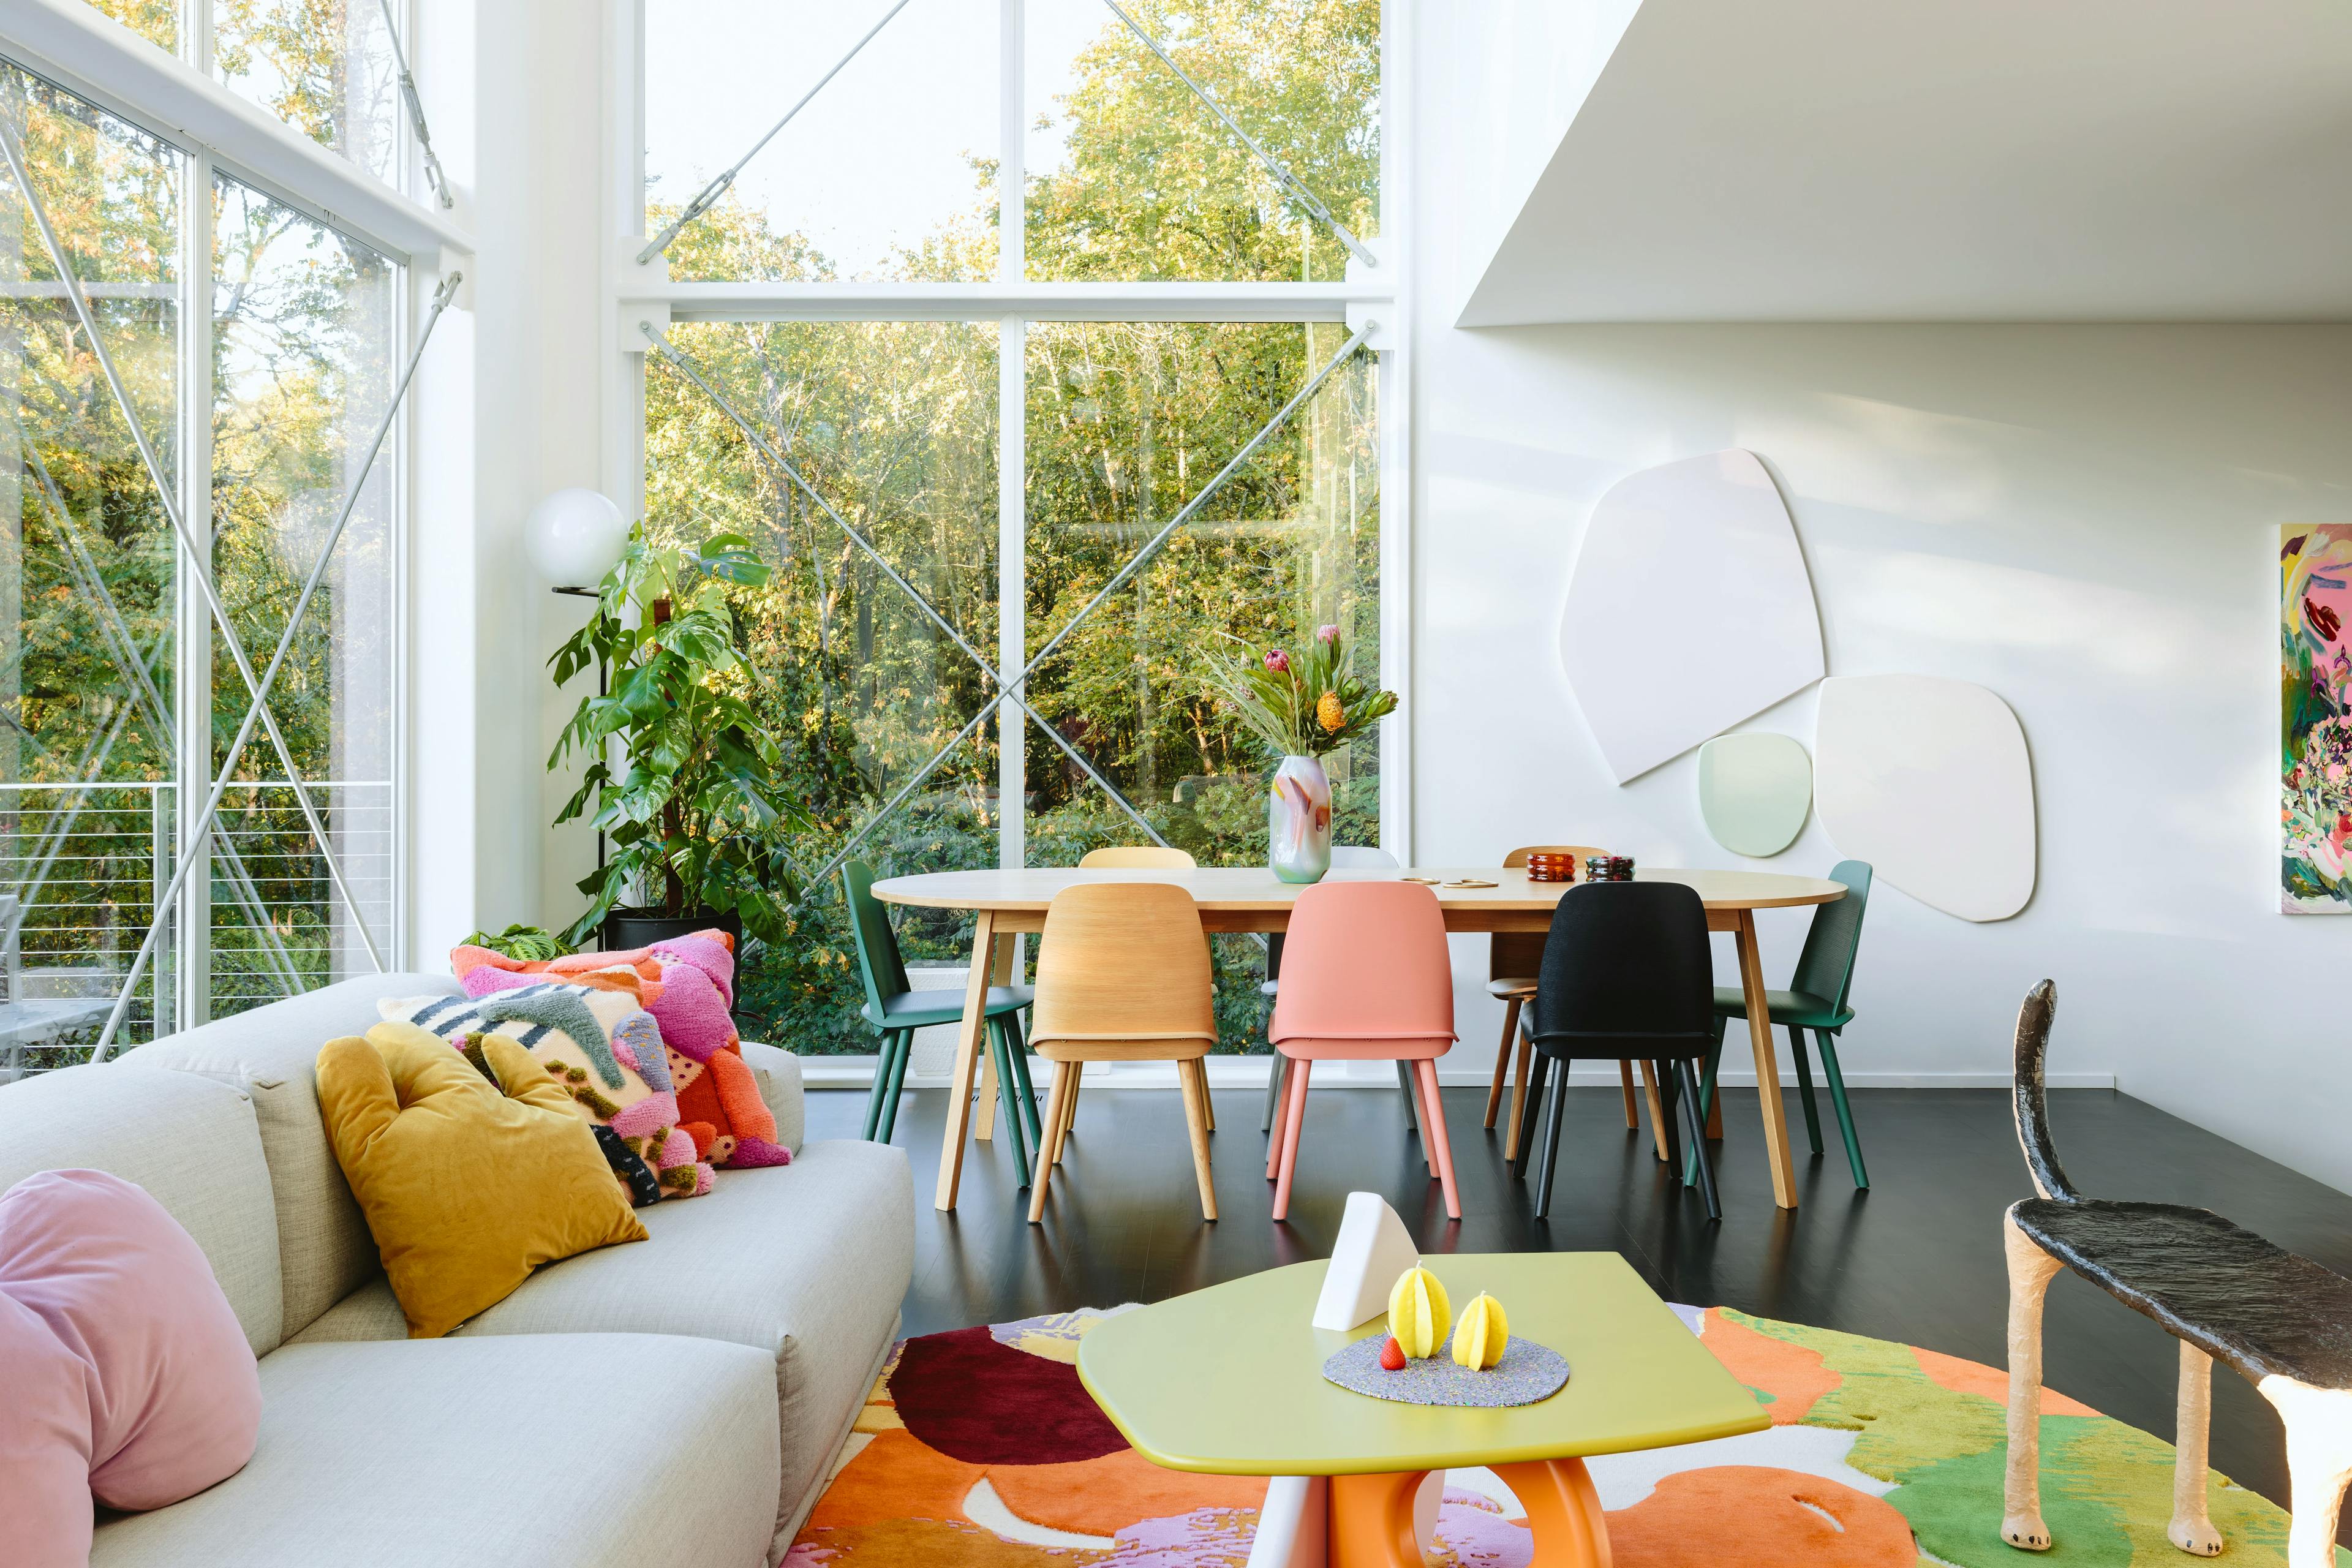 A light-filled sunroom with floor-to-ceiling windows, gray couch, and dining table with colorful, mismatched chairs.